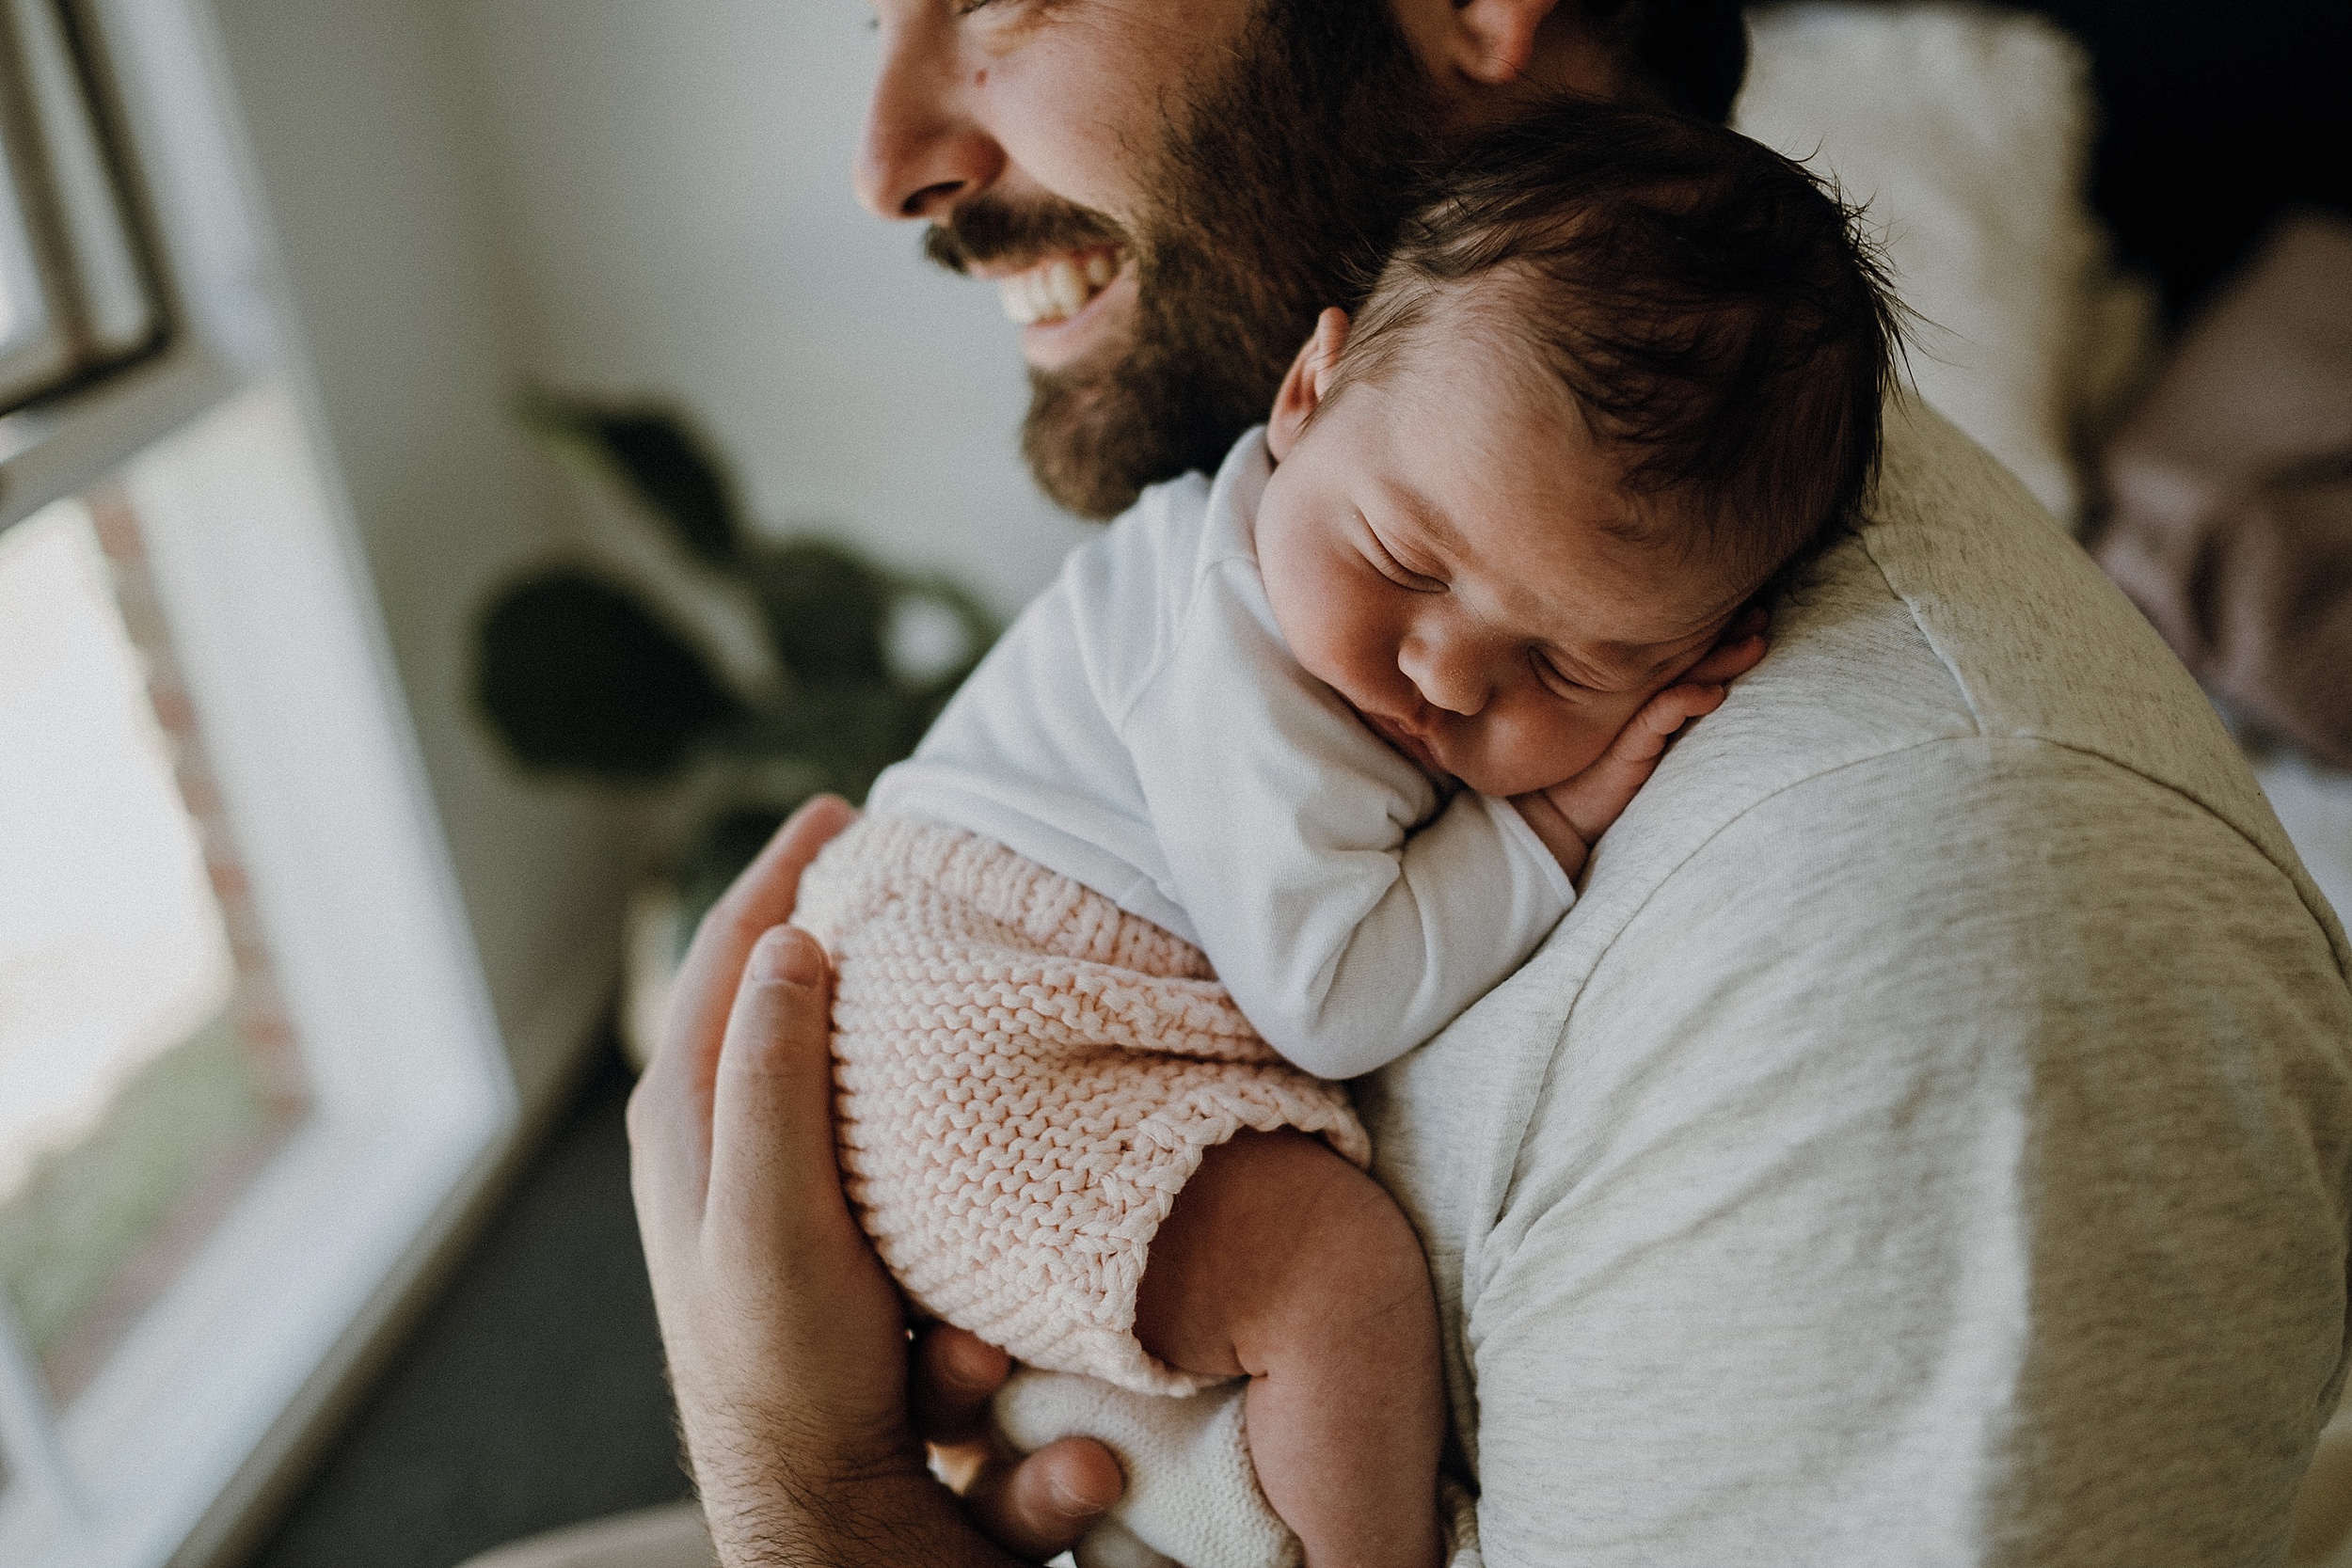 newborn pictures with dad, fatherhood poses, inhome lifestyle baby pictures